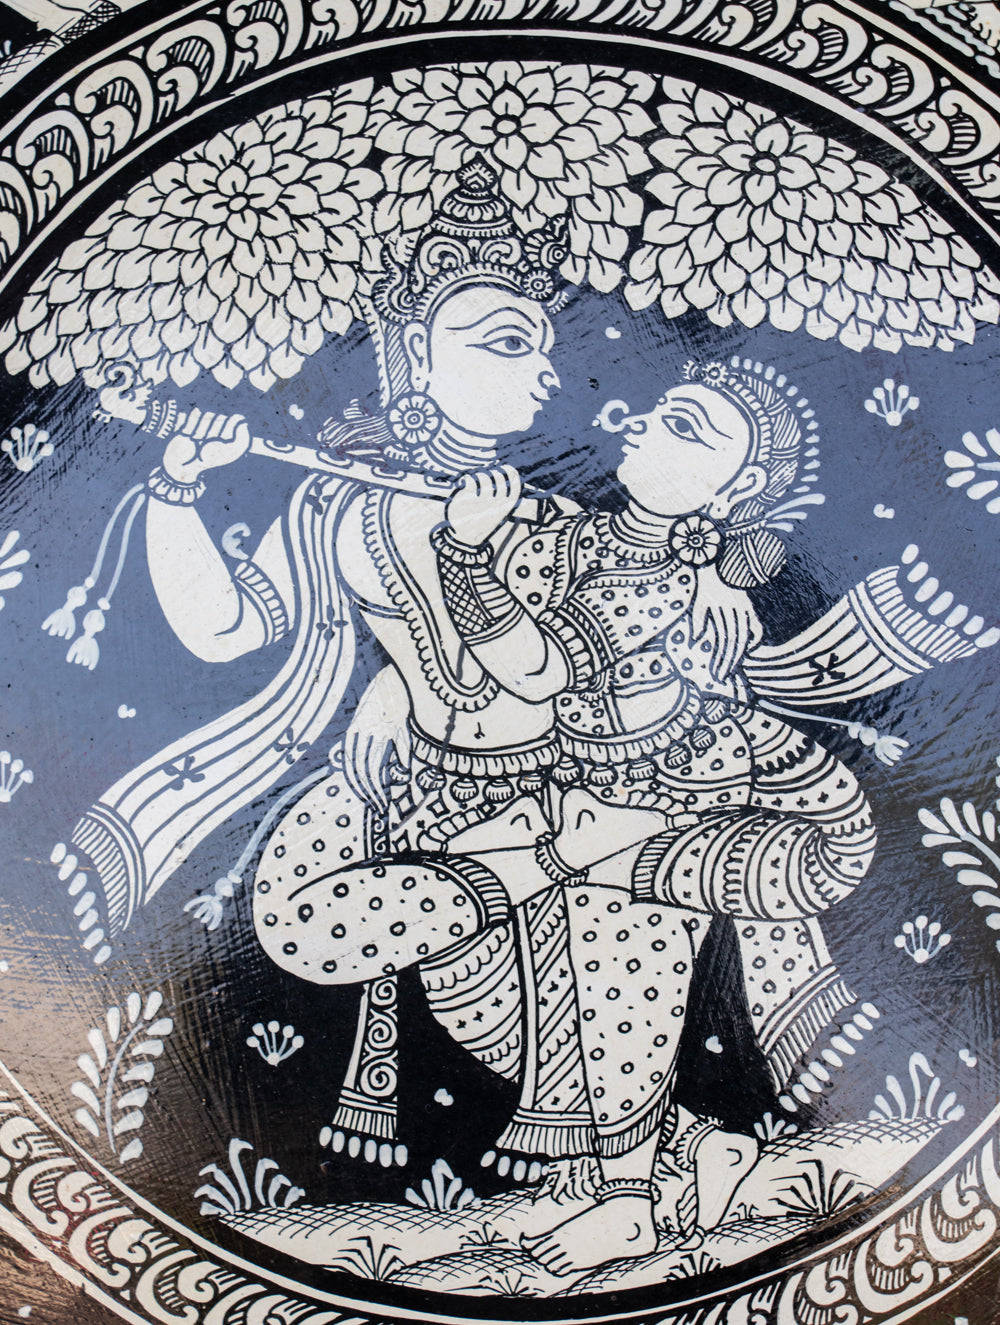 Load image into Gallery viewer, Pattachitra Art Wall Plaque - Radha Krishna - The India Craft House 